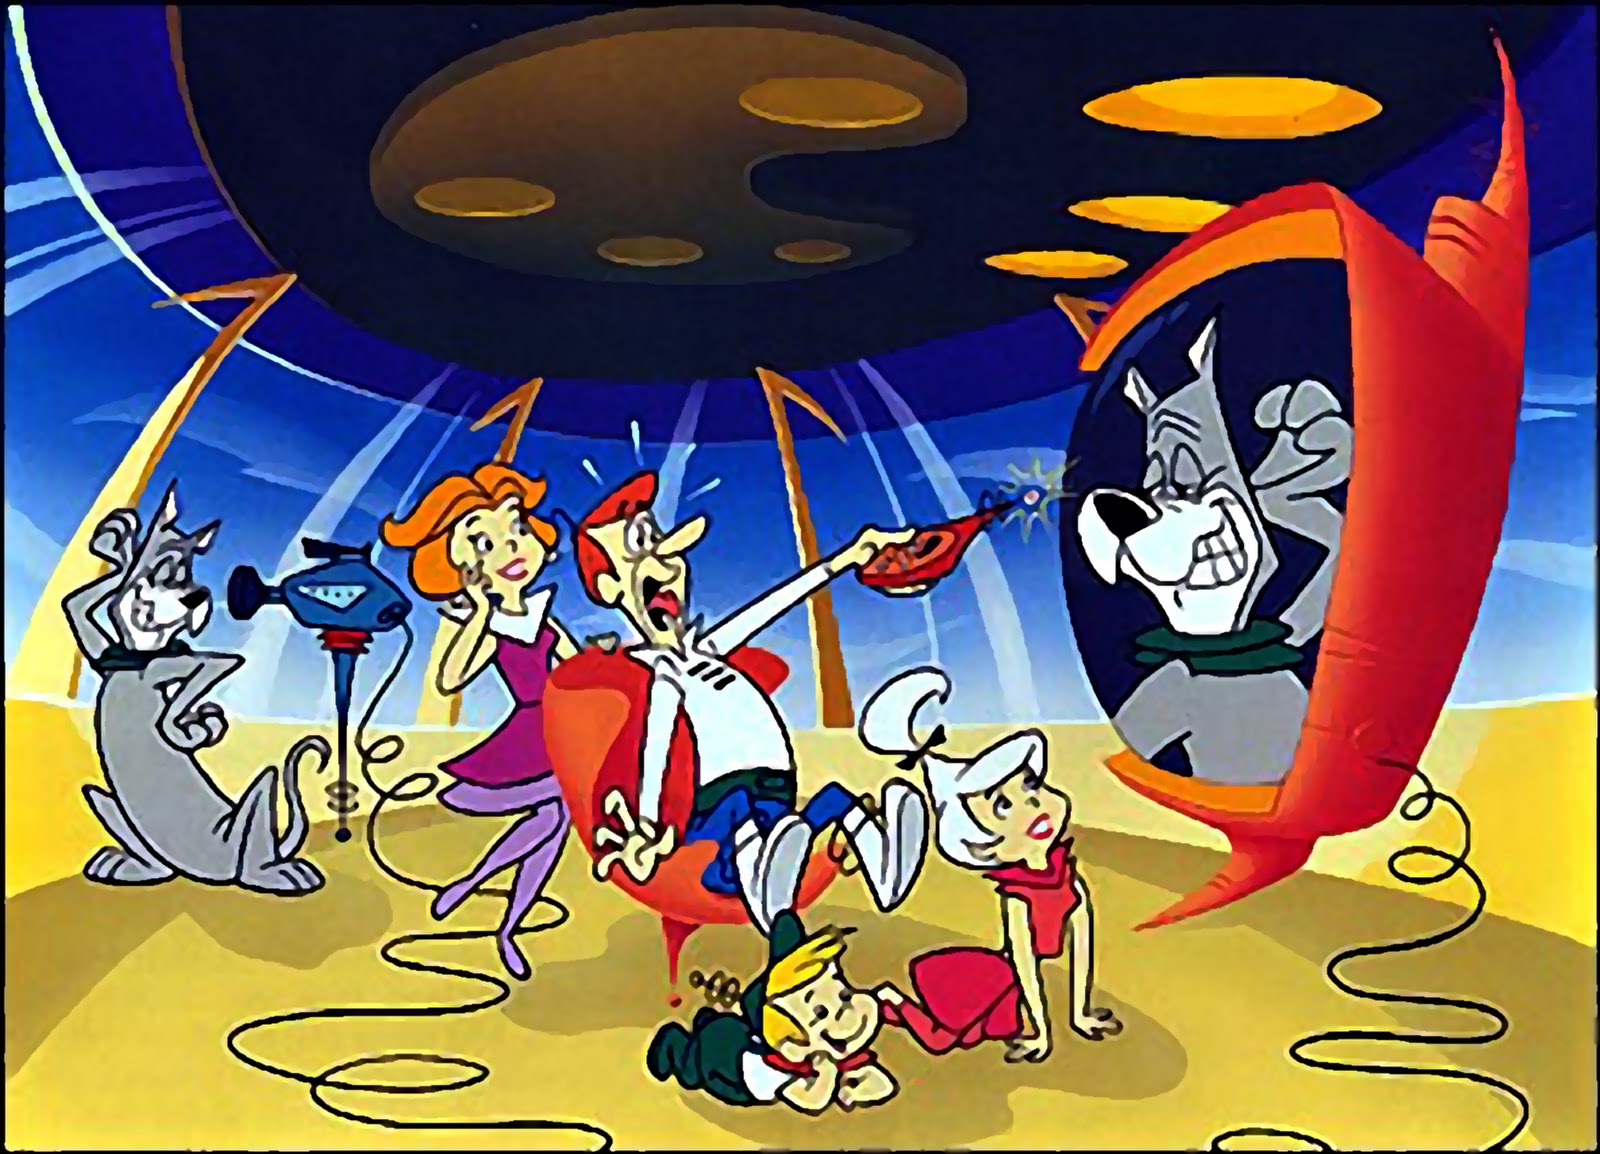 What year was The Jetsons set in?